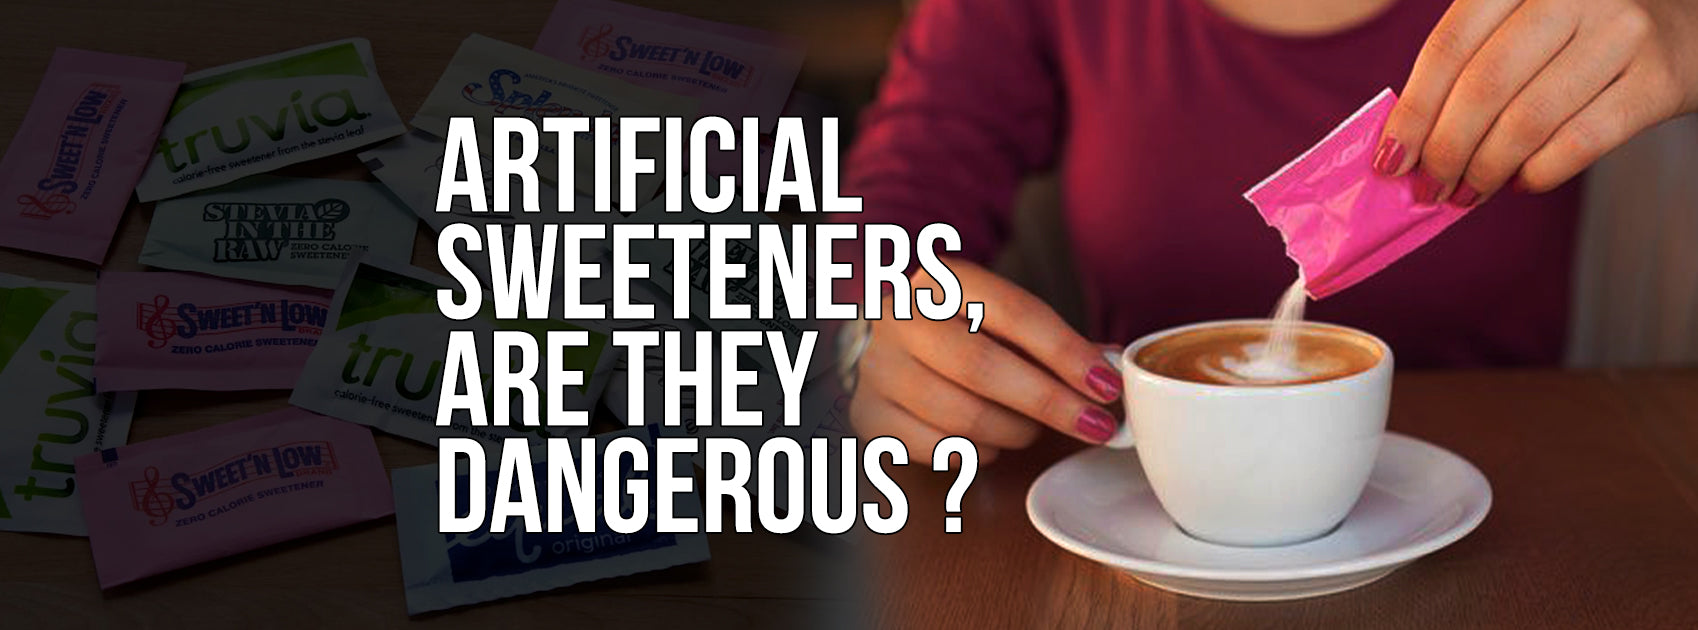 ARTIFICIAL SWEETENERS, ARE THEY DANGEROUS, AND HOW MUCH?